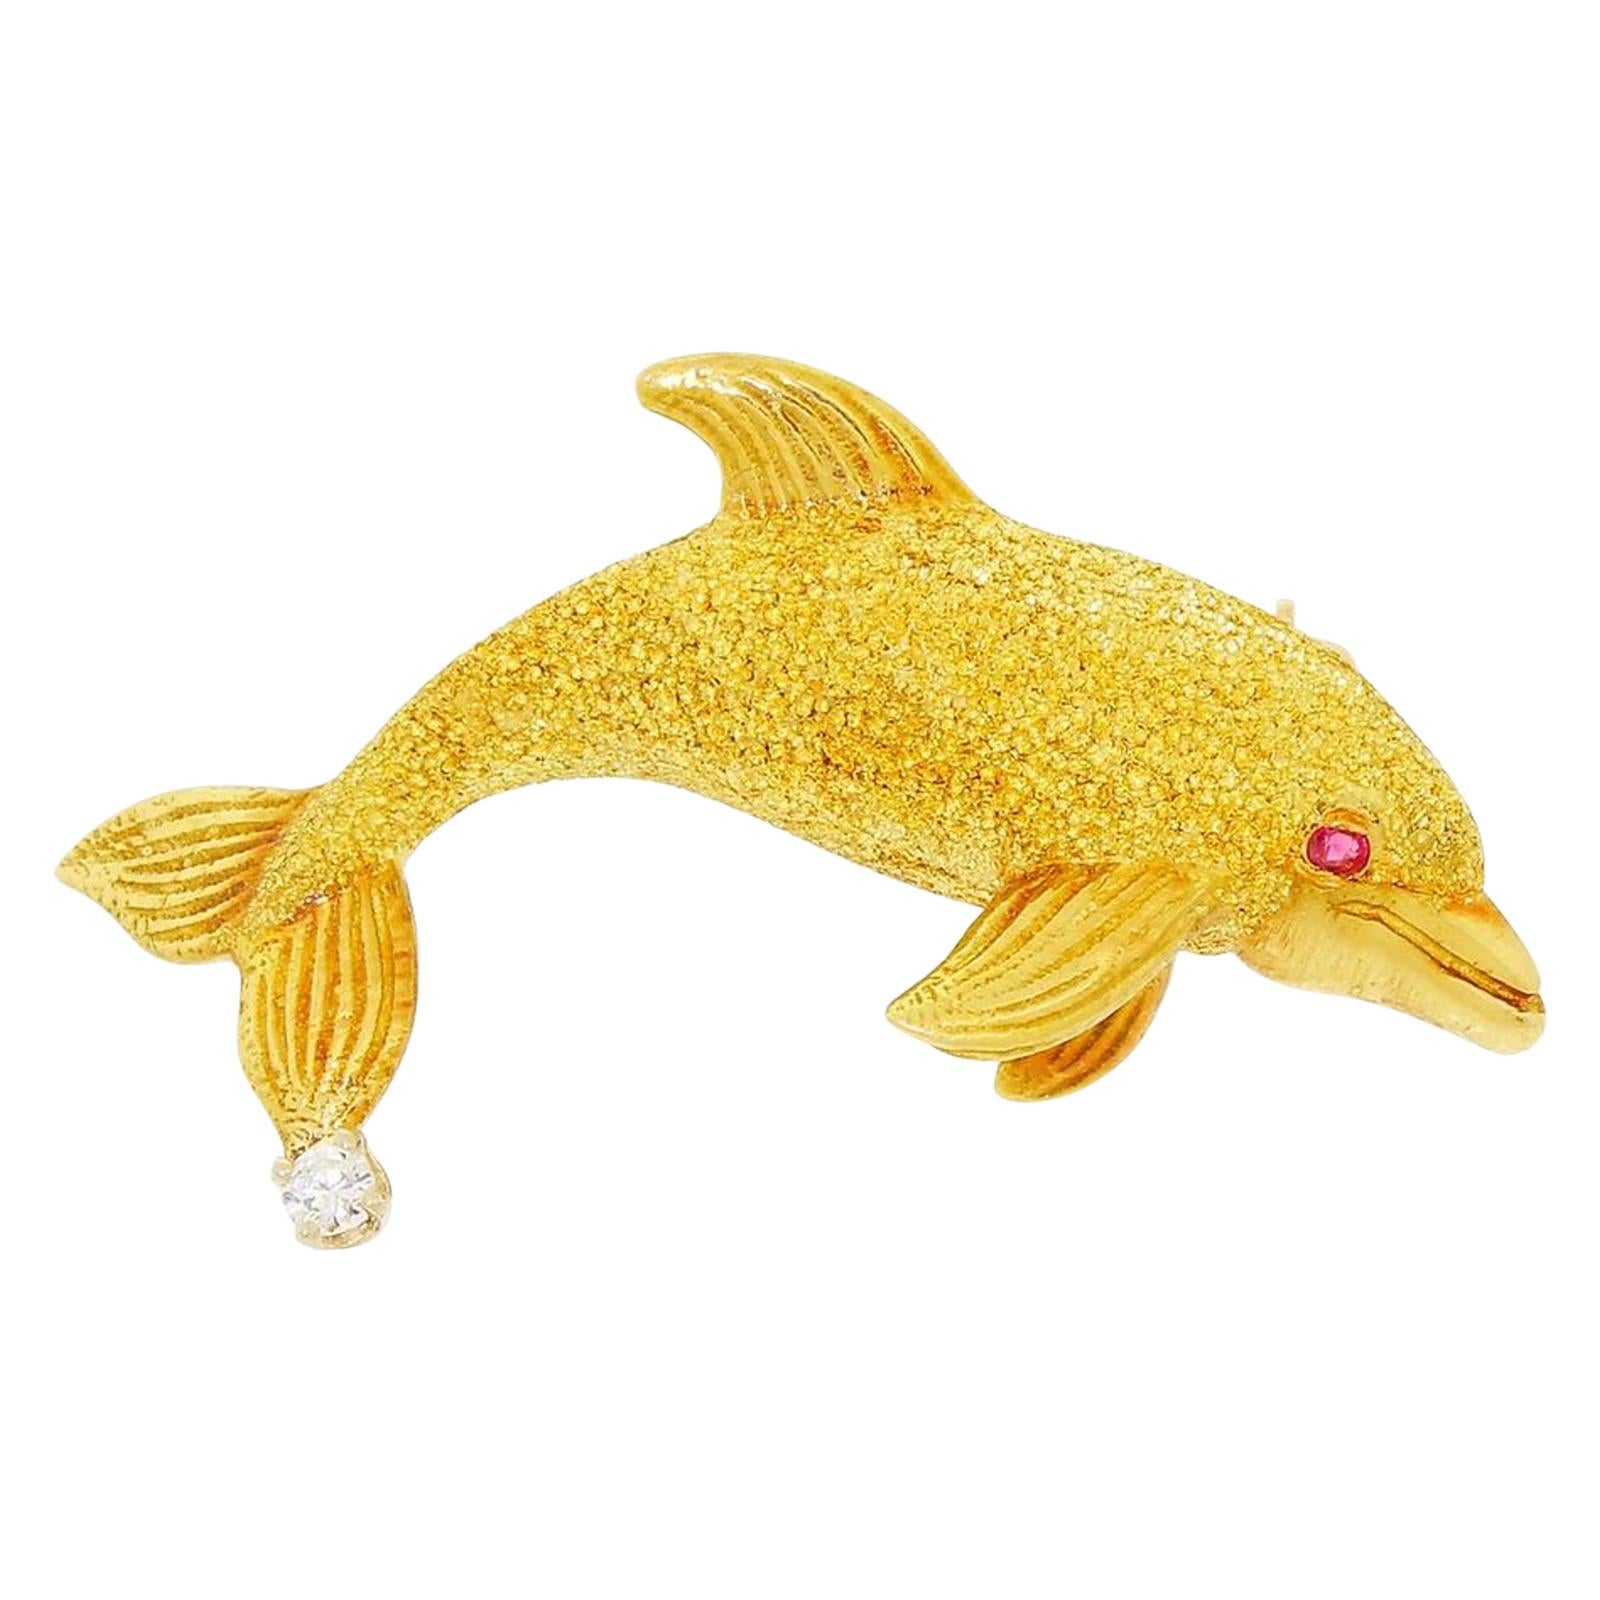 Exquisite George Lederman 18 Karat Gold and Diamond Ruby Dolphin Brooch Pin